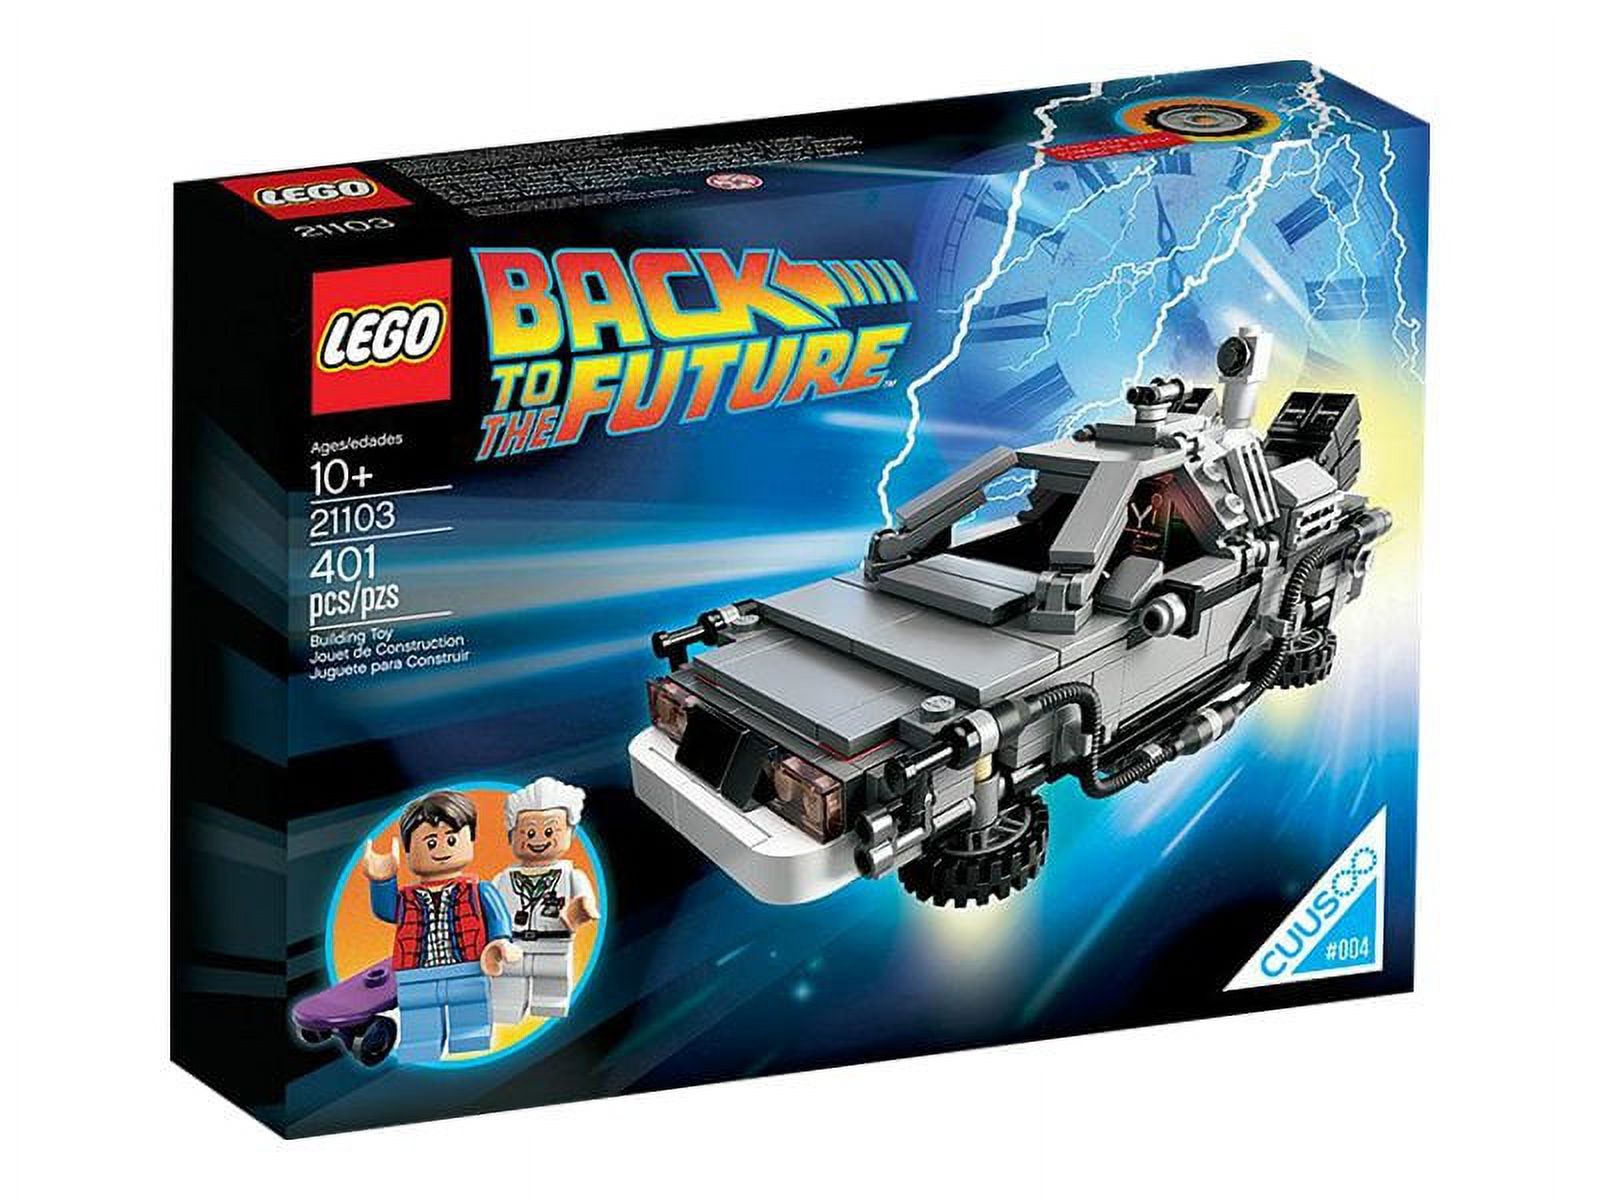 LEGO Cuusoo The DeLorean Time Machine Play Set - image 3 of 6